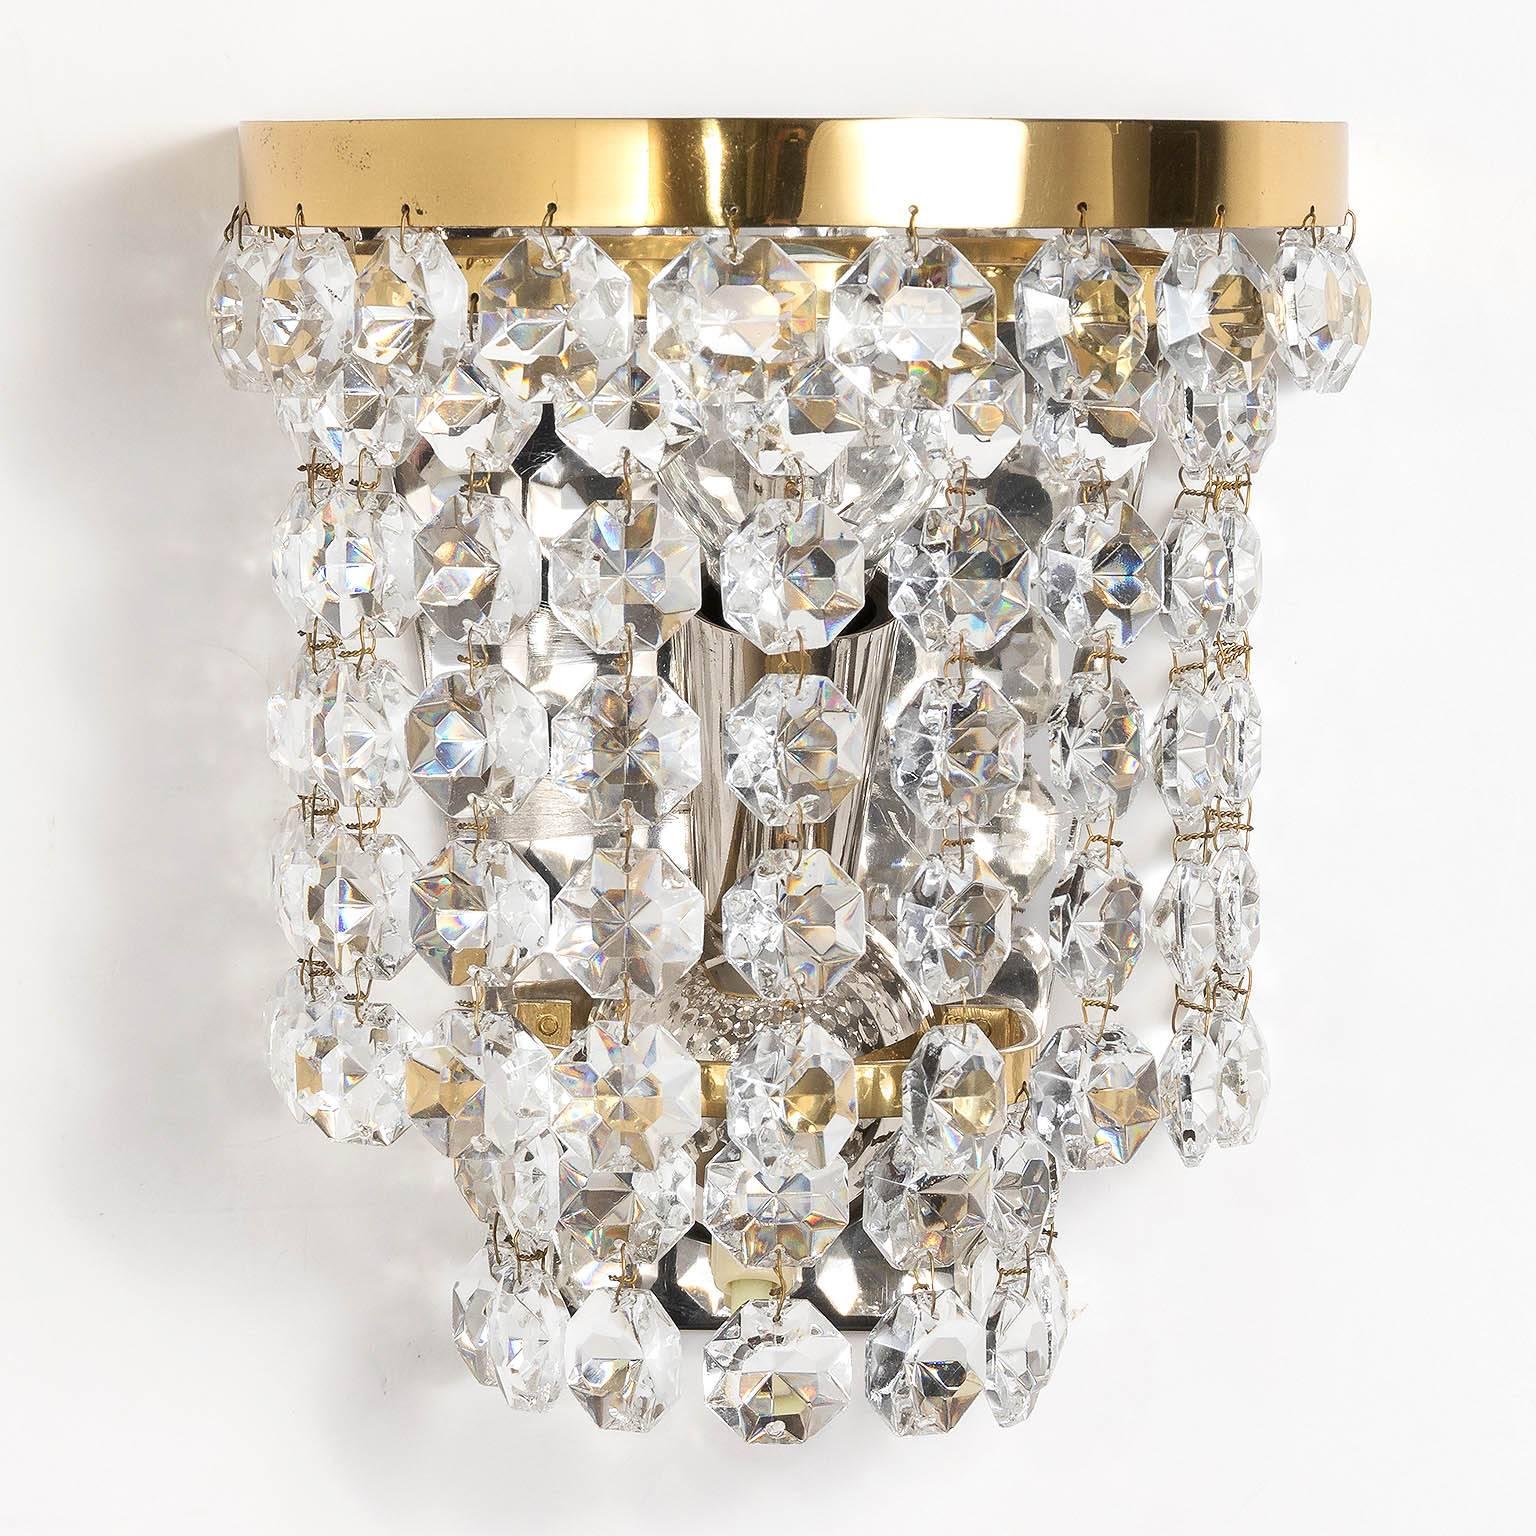 A pair of handmade and high quality sconces by Bakalowits & Sohne, Vienna, 1950s-1960s. They are made of a nickel-plated backplate which holds two brass rings decorated with diamond shaped handcut crystals.
Each fixture takes one small screw base